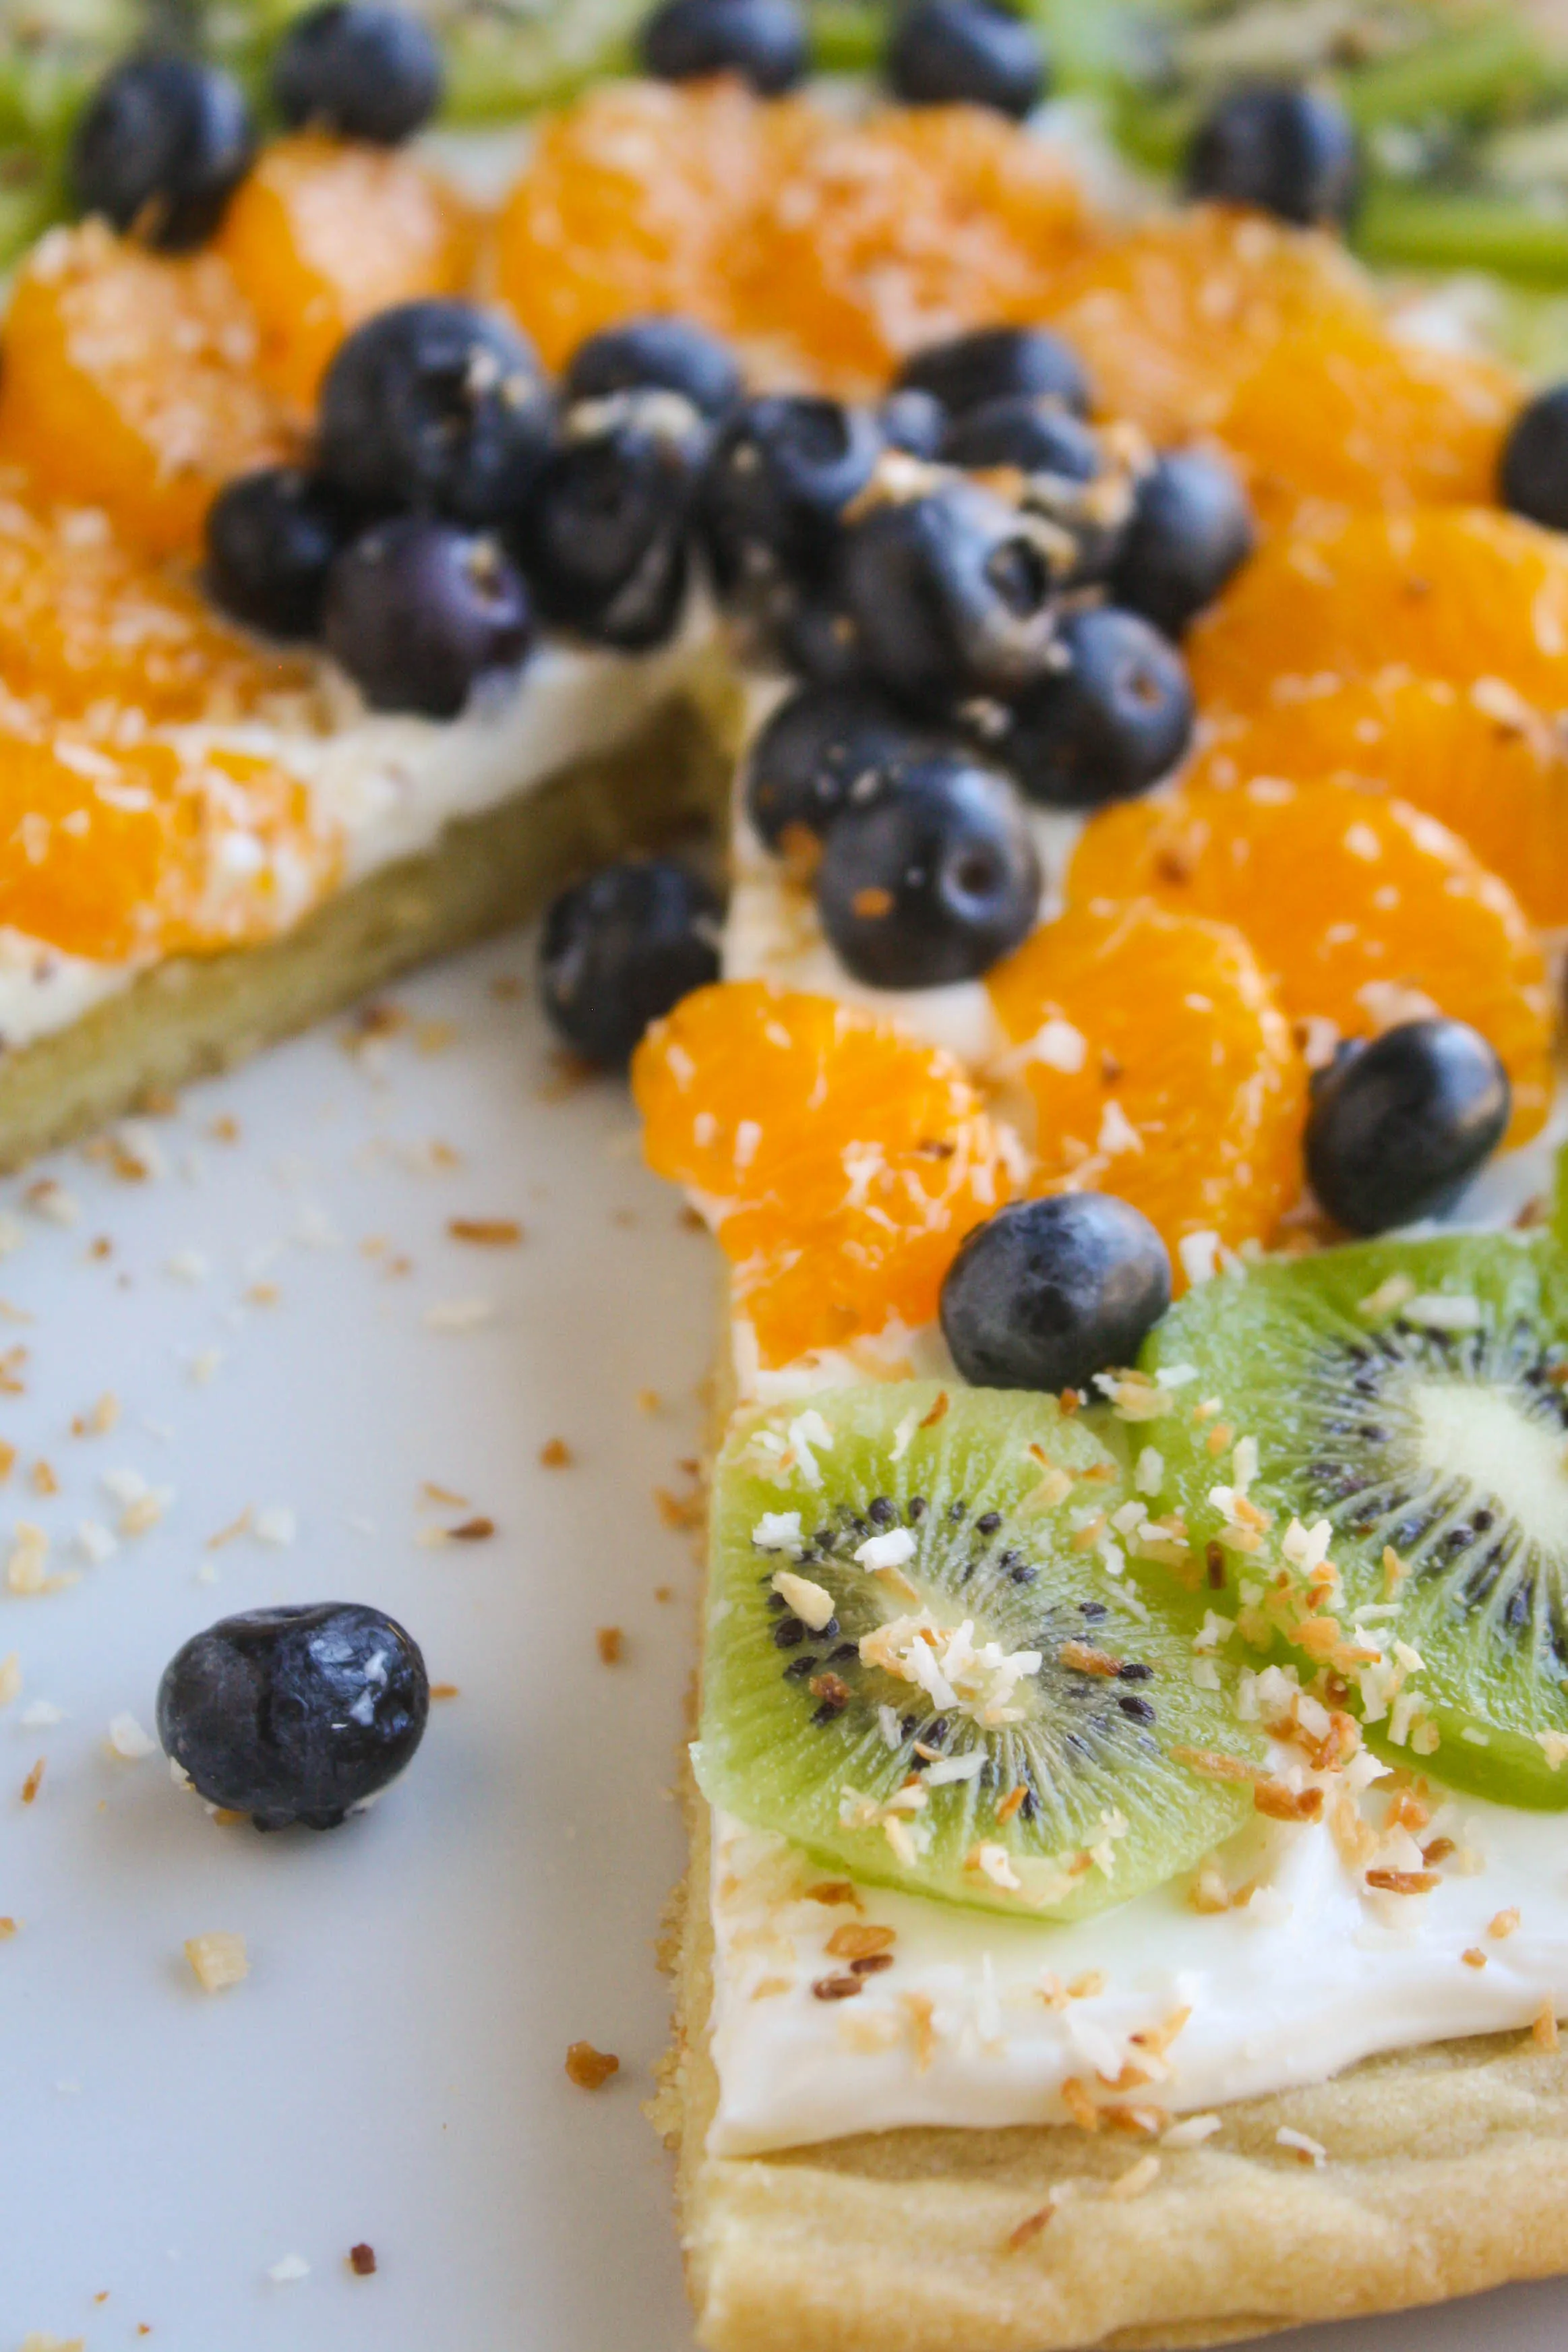 Sugar Cookie Fruit Pizza is a delicious dessert! You'll want more than one slice of this sugar-cookie-crust and fruit treat!